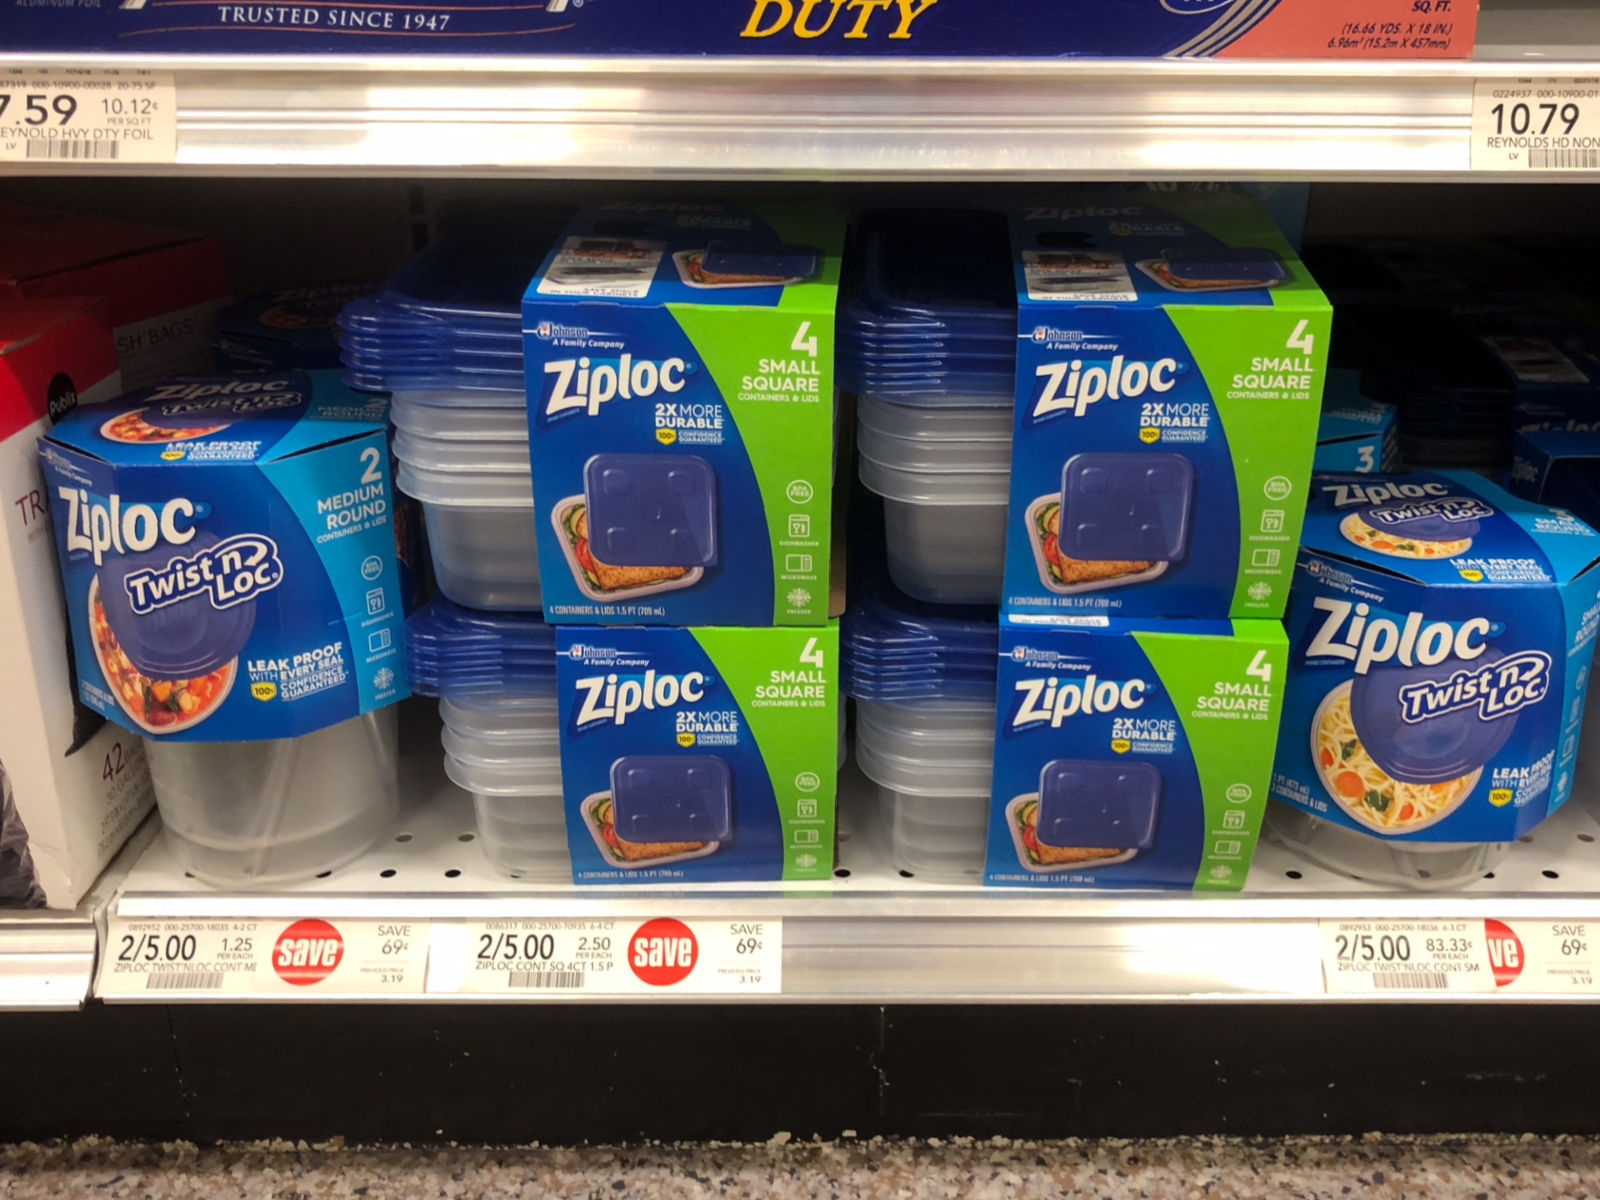 Ziploc® Twist ’n Loc® Containers Keep Your Foods Fresh Without Spills Or Leaks! on I Heart Publix